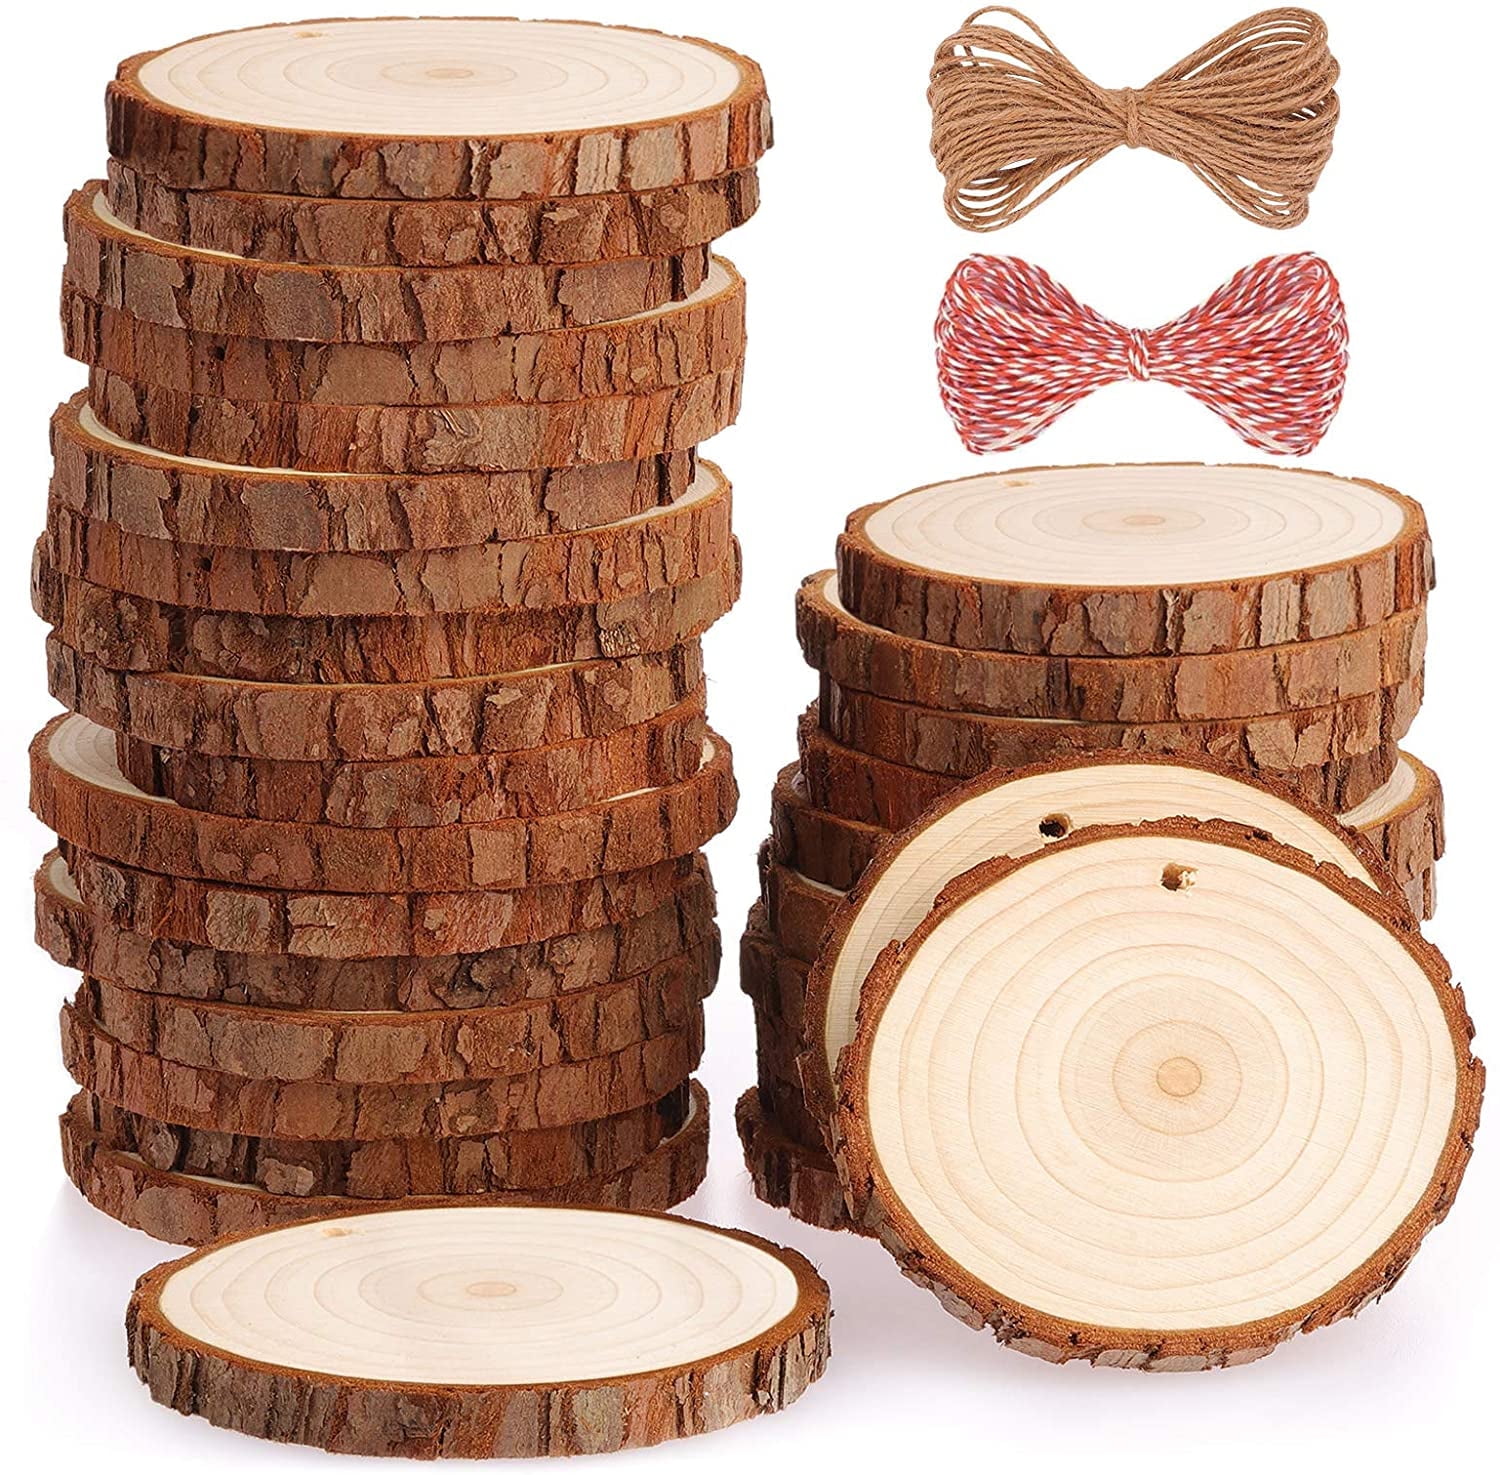 Fuyit Natural Wood Slices 30 Pcs 2.4-2.8 Inches Craft Wood Kit